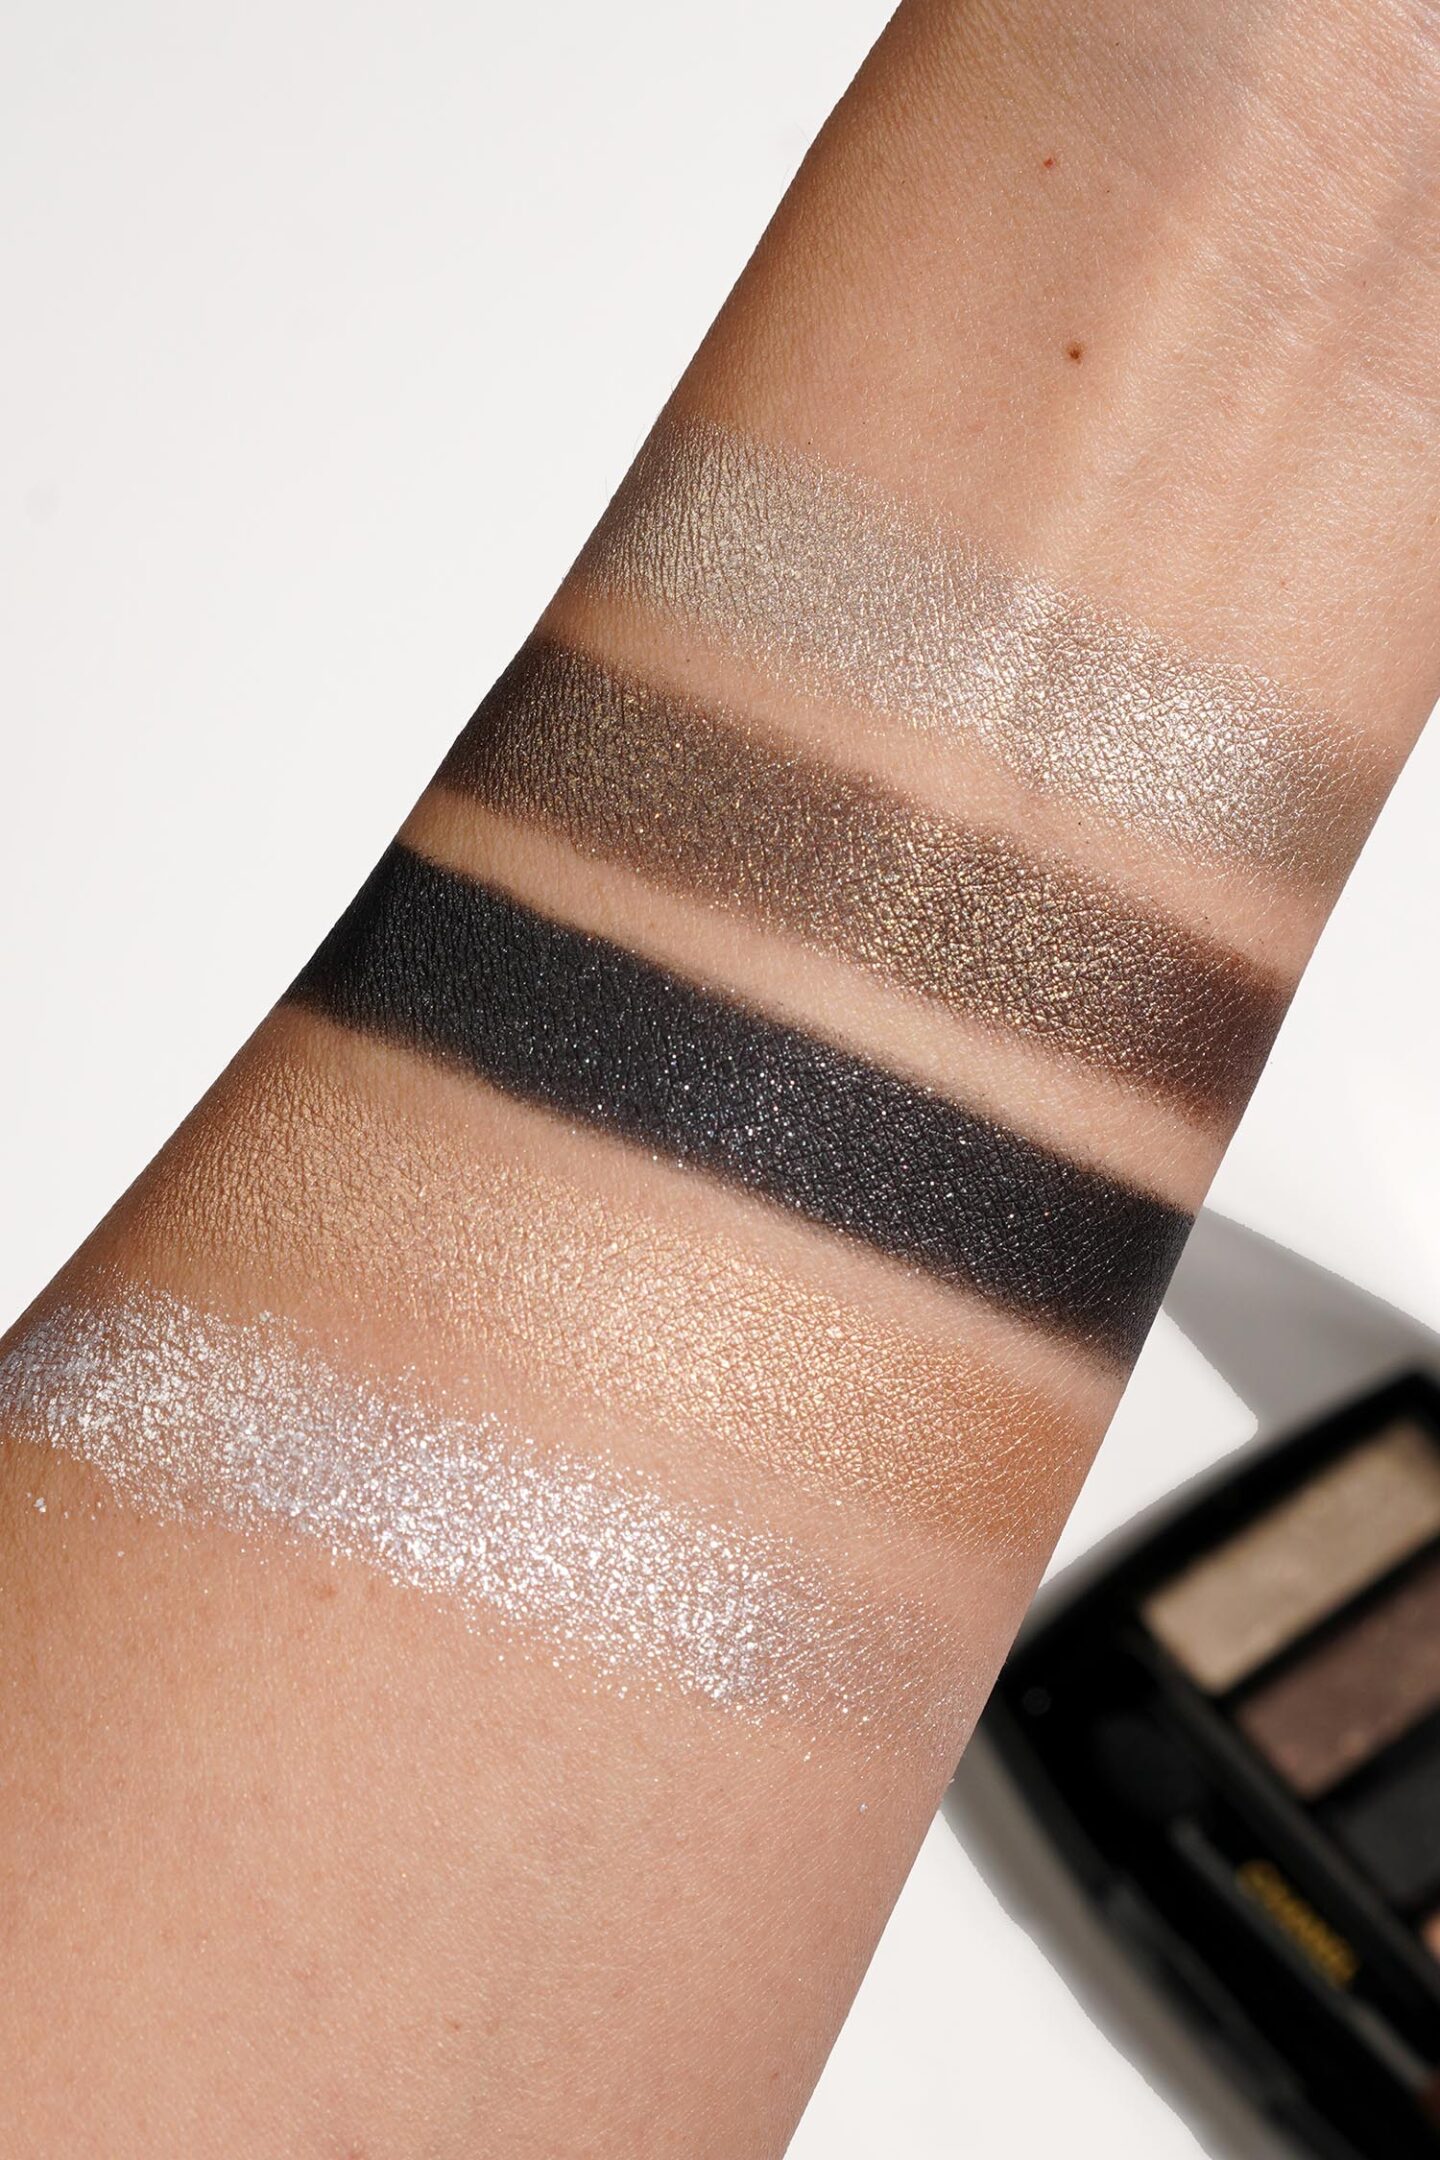 Chanel Lumiere Graphique Eyeshadow Palette swatches